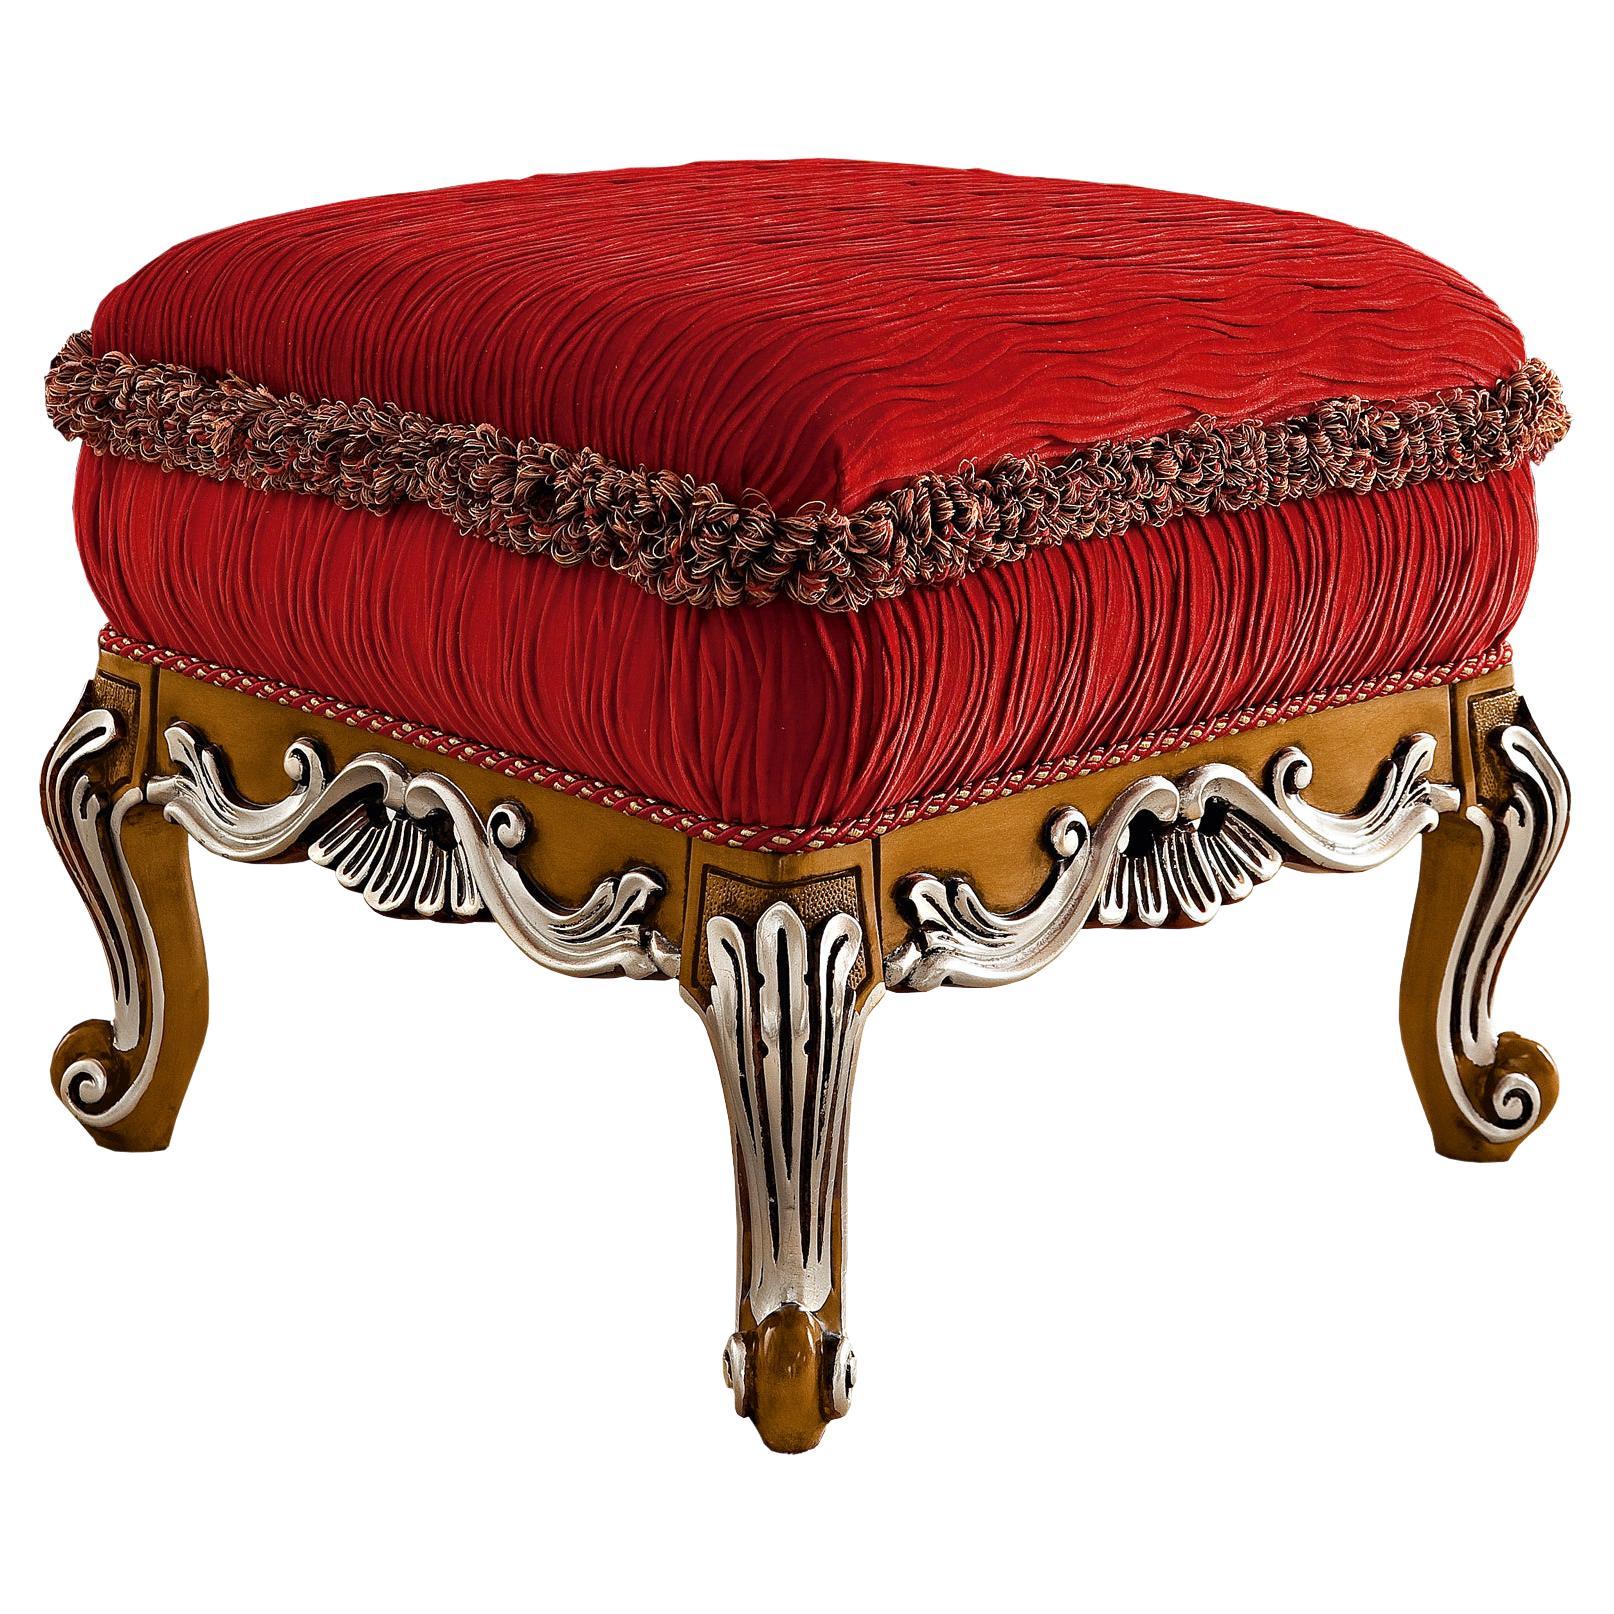 21st Century Red Baroque-Inspired Ottoman by Modenese Gastone